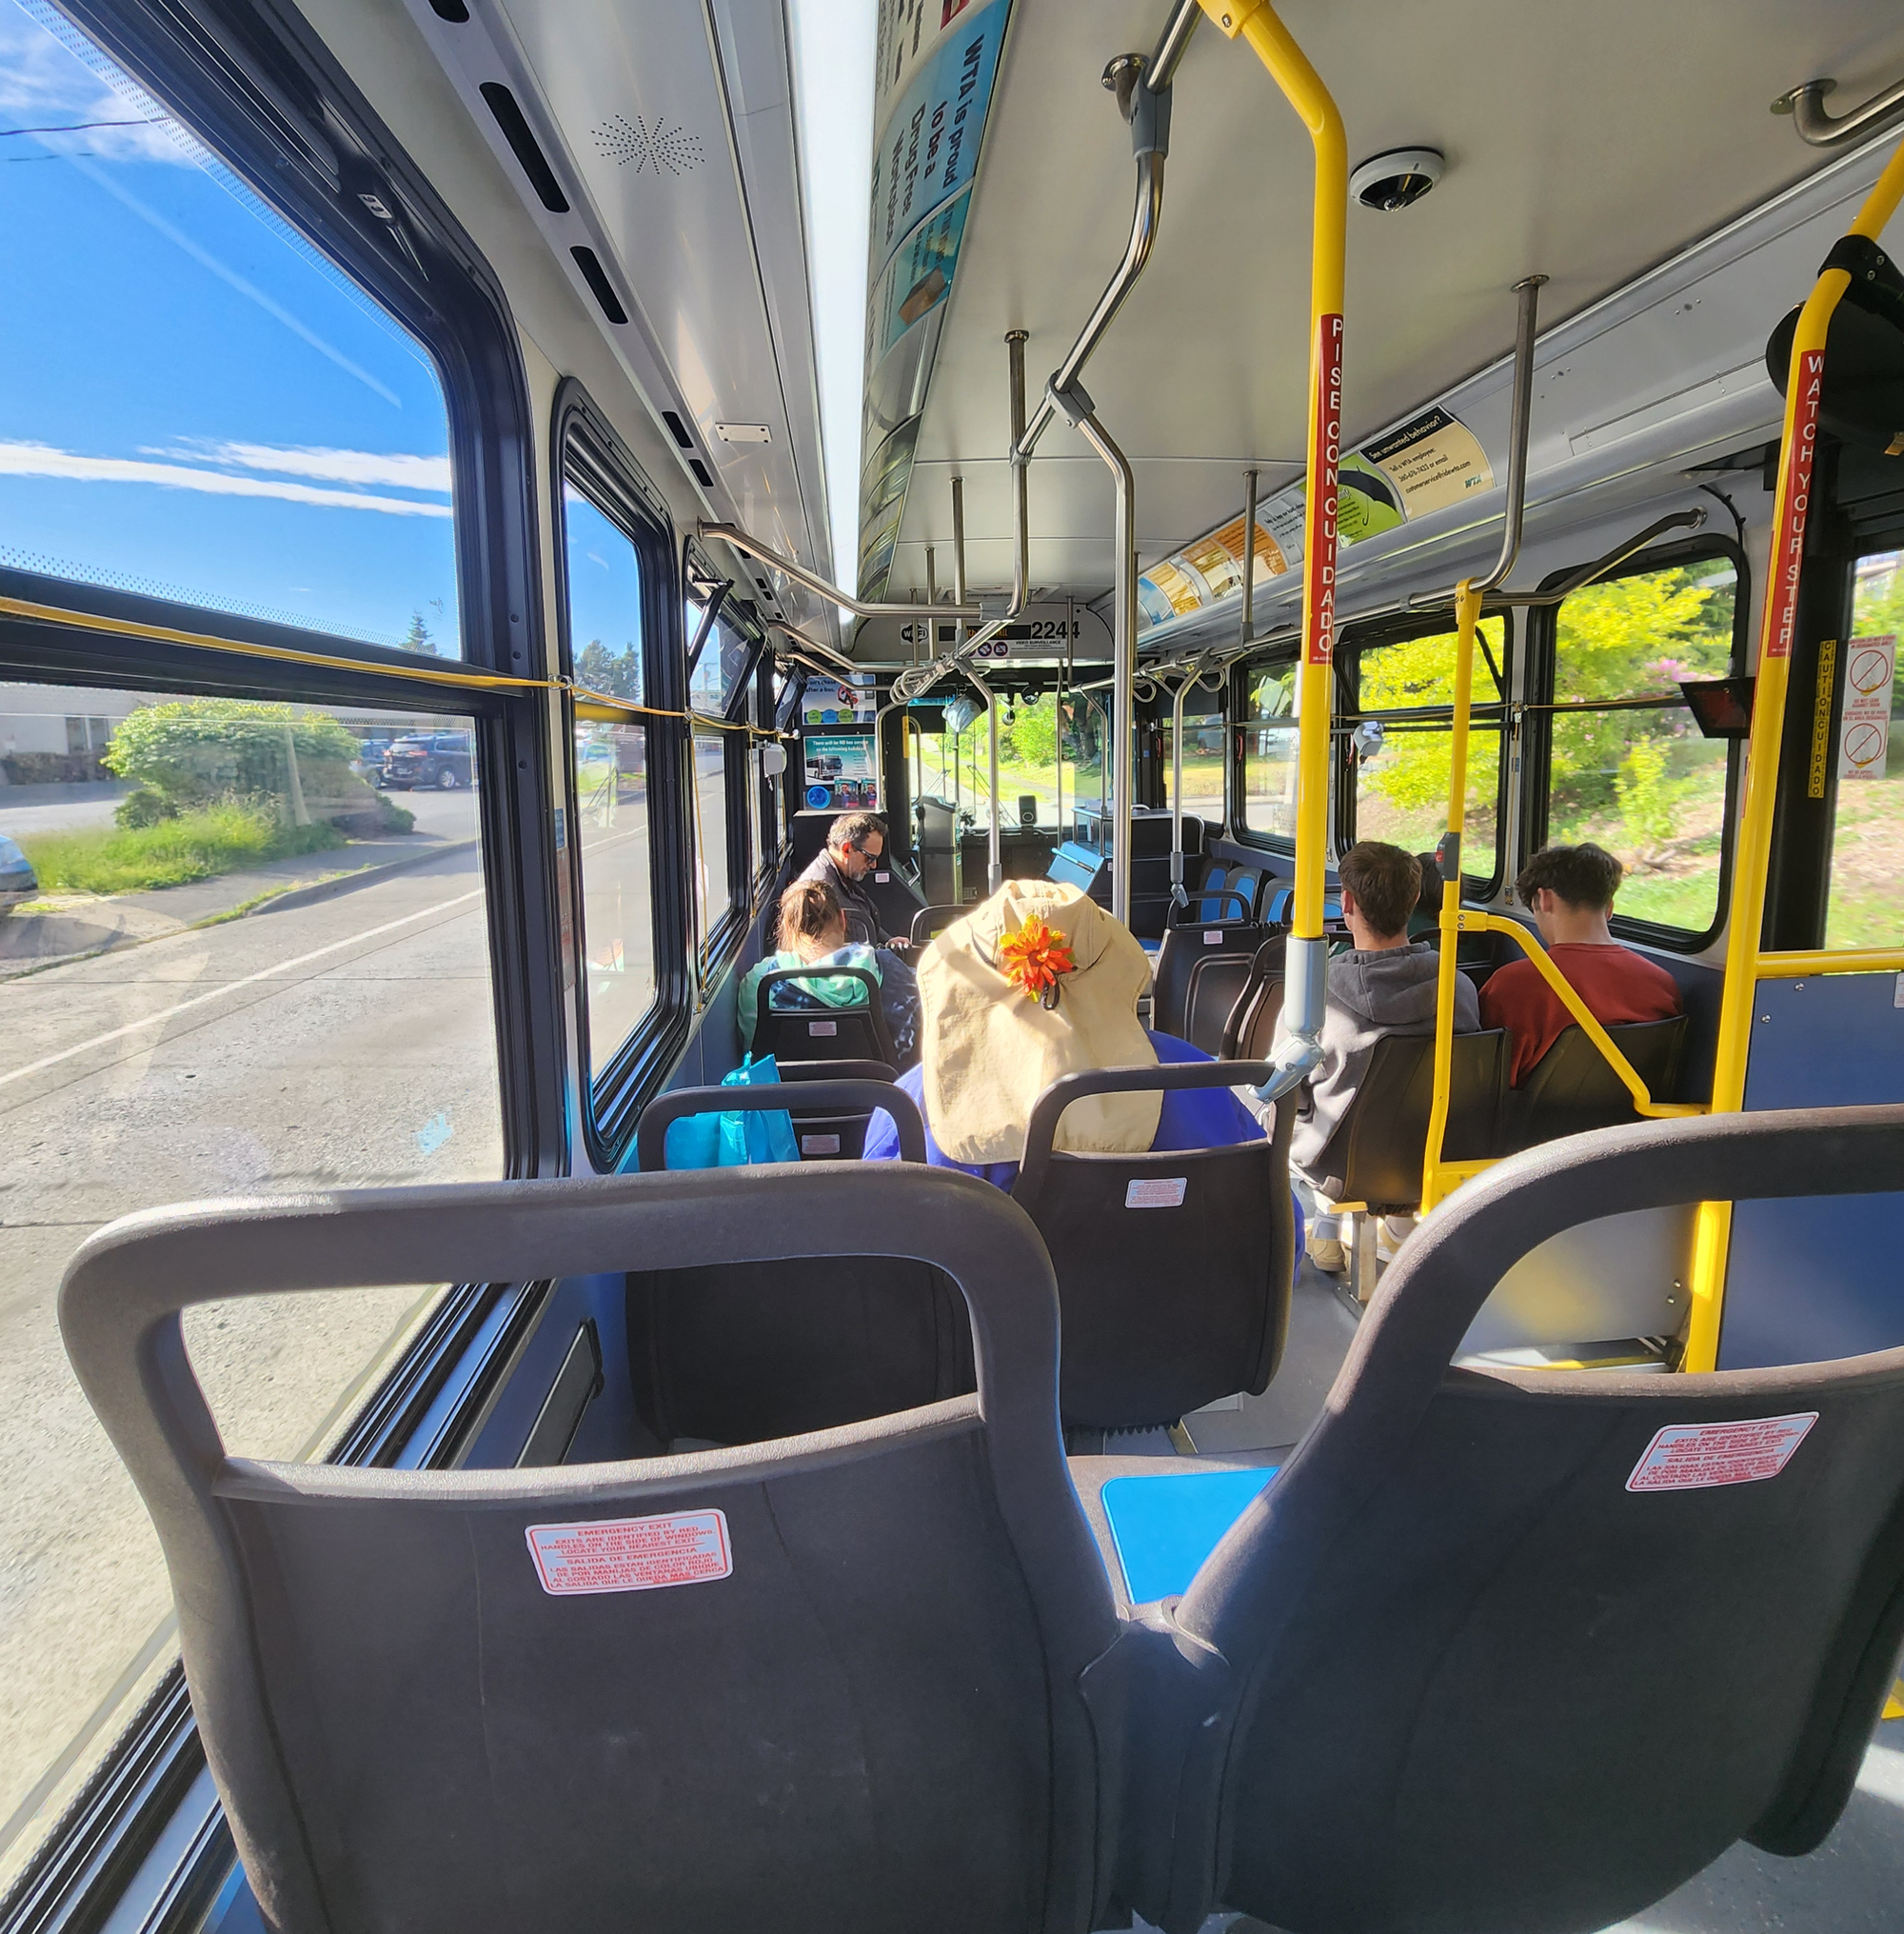 An interior view of a bus.